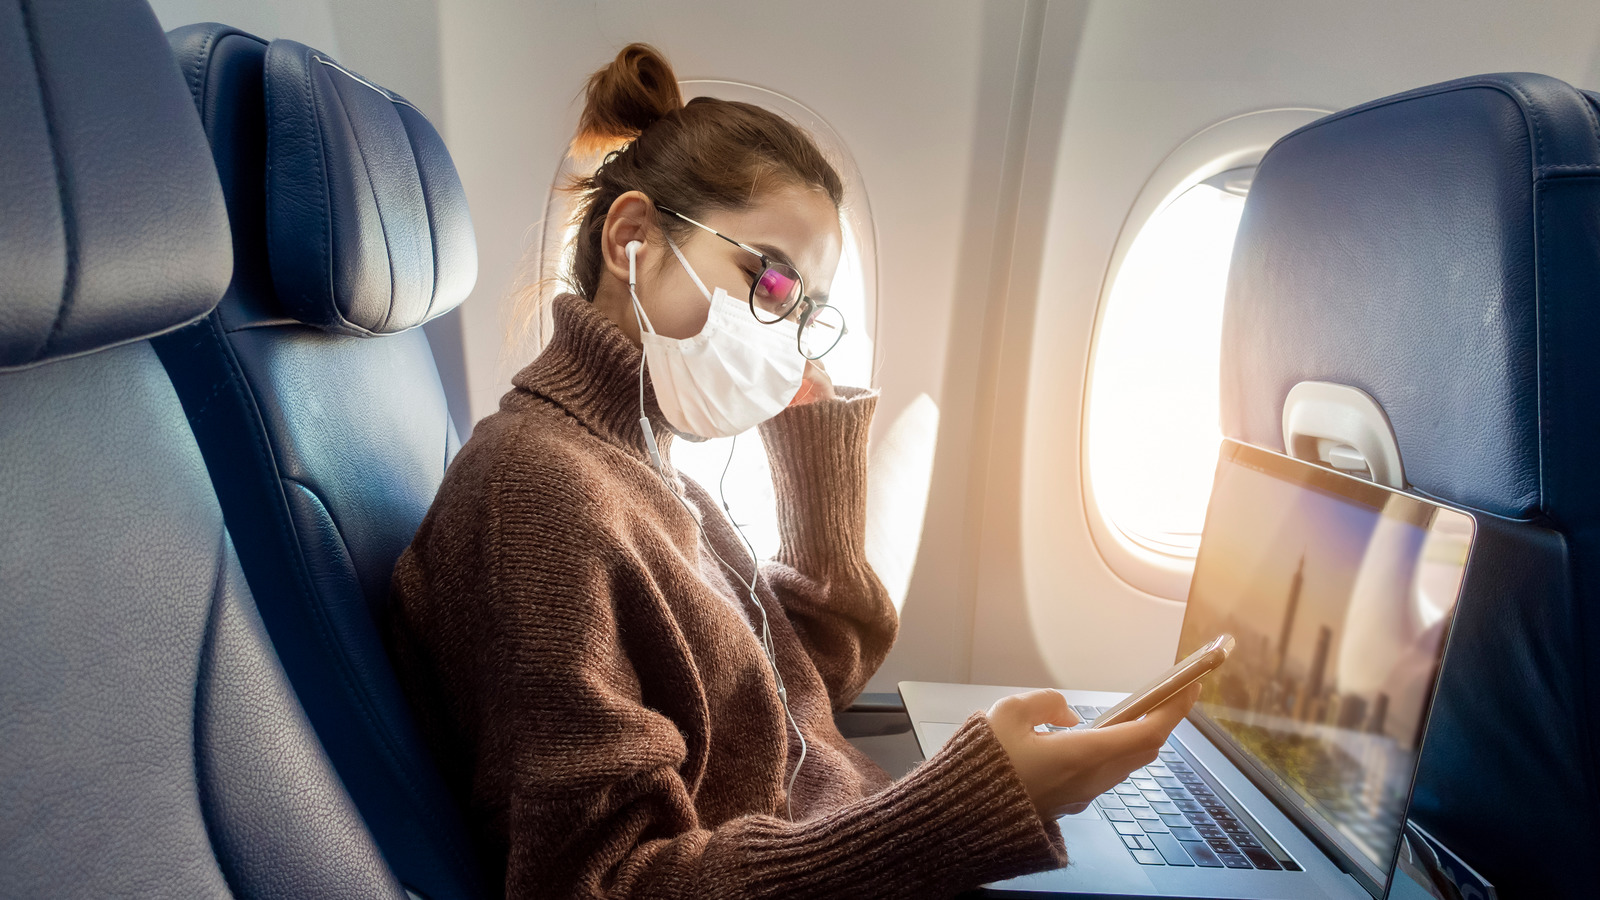 The Best Type Of Mask To Wear On A Plane